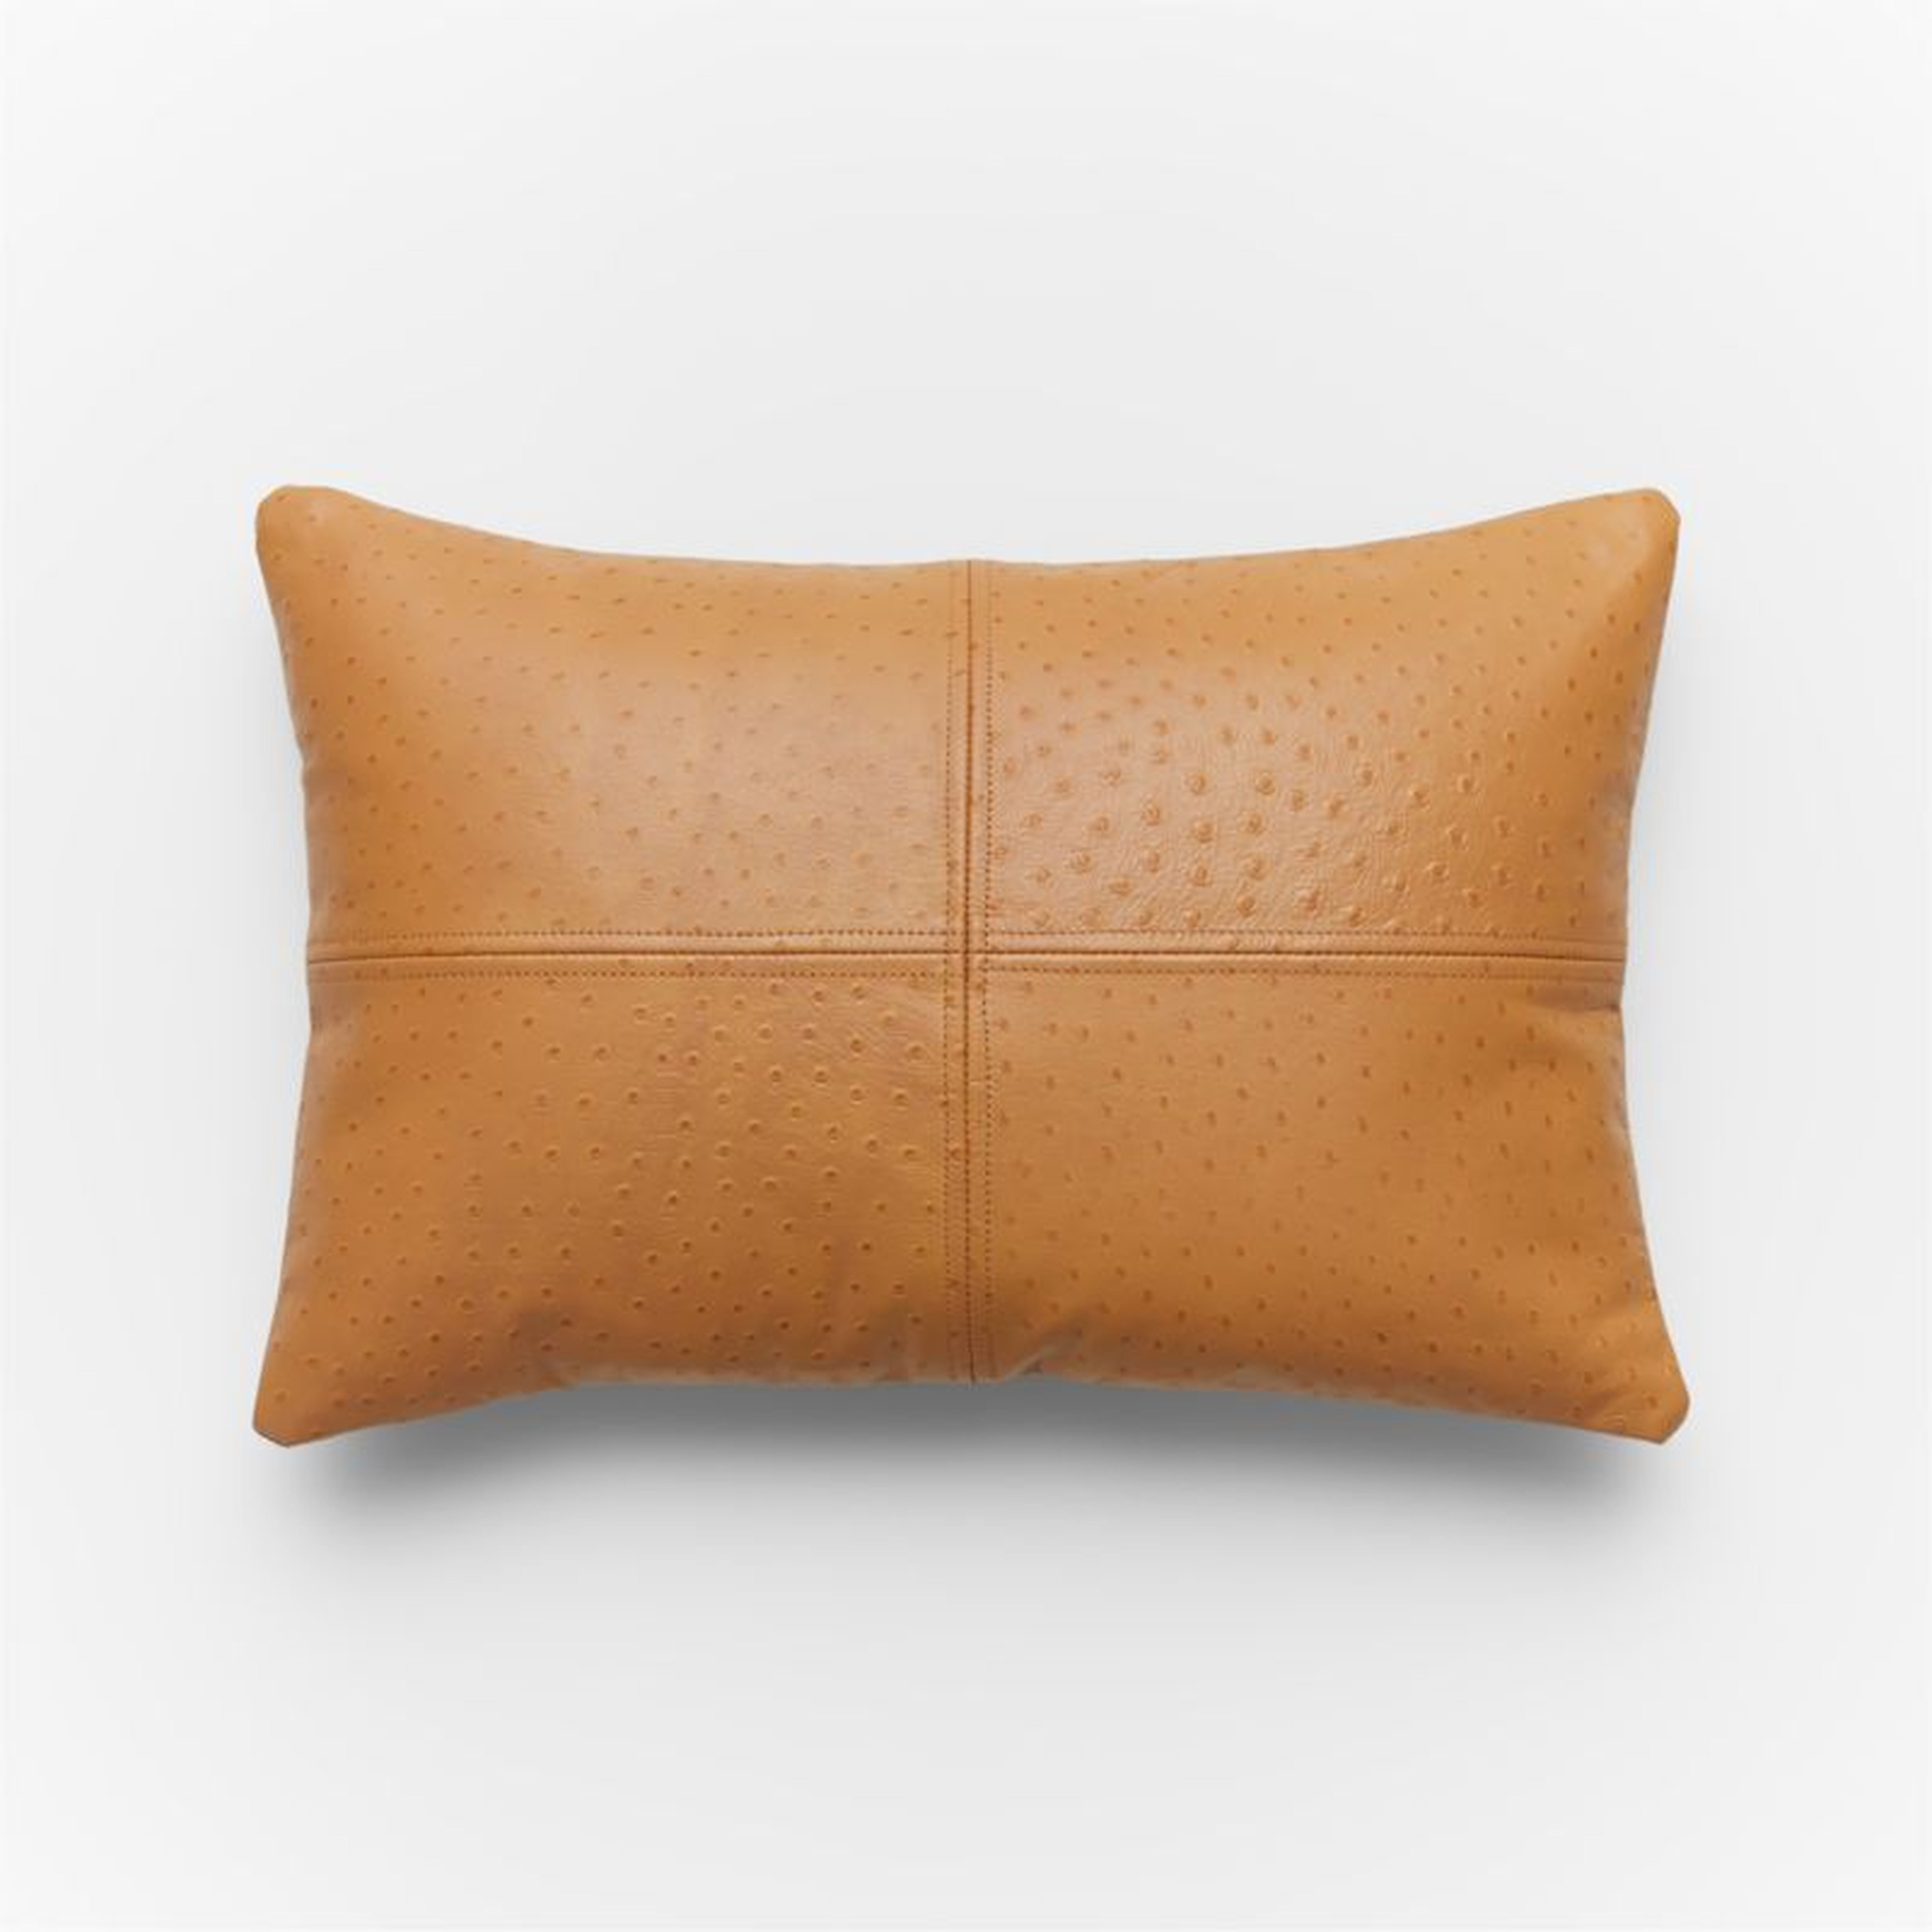 Rue Tan Leather Throw Pillow with Feather-Down Insert 18"x12" - CB2